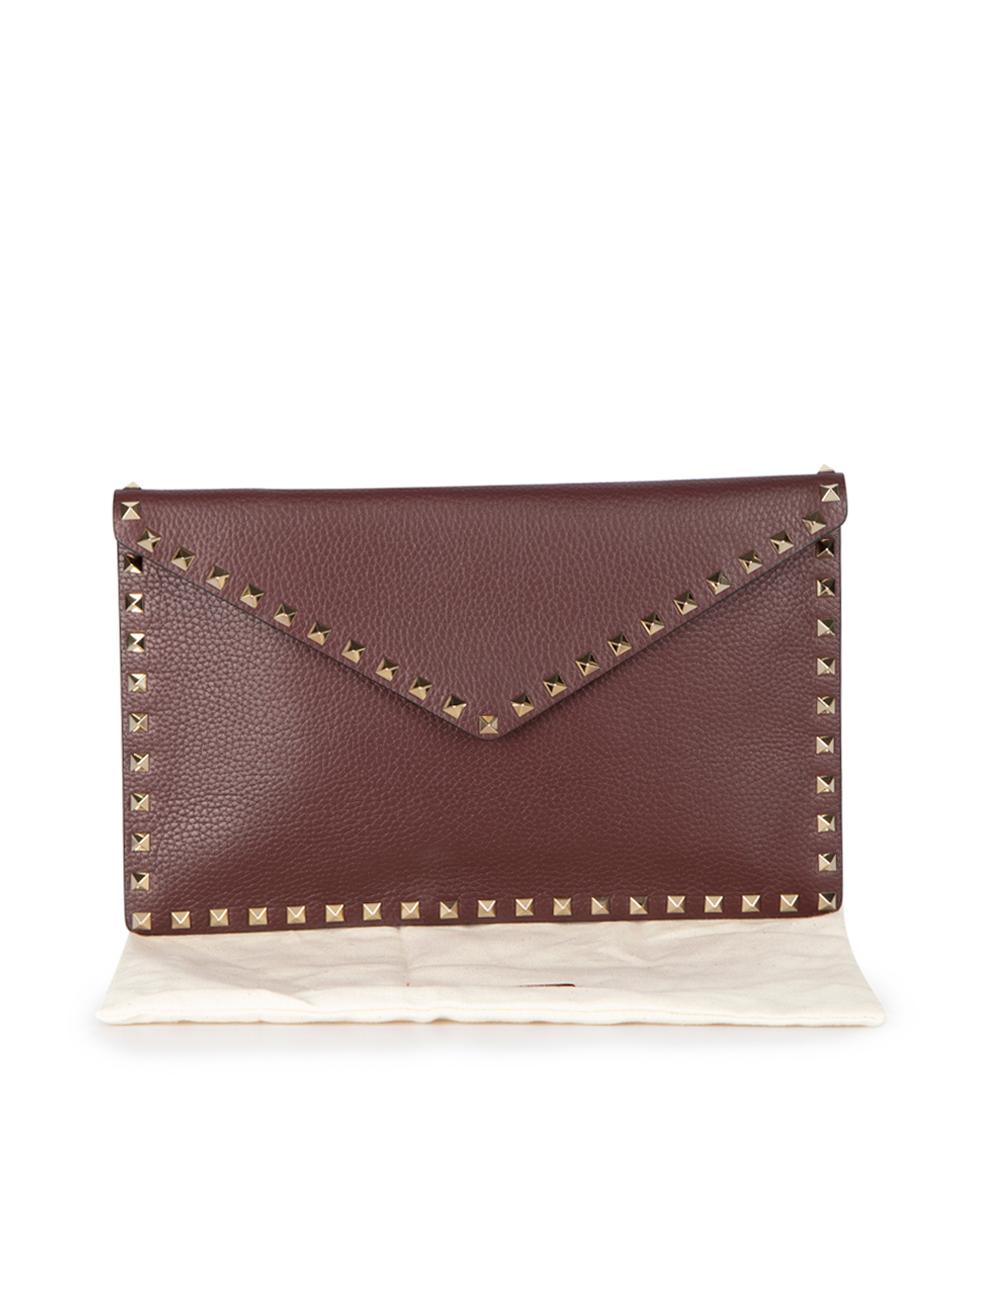 Valentino Women's Burgundy Grained Leather Studded Envelope Clutch 3